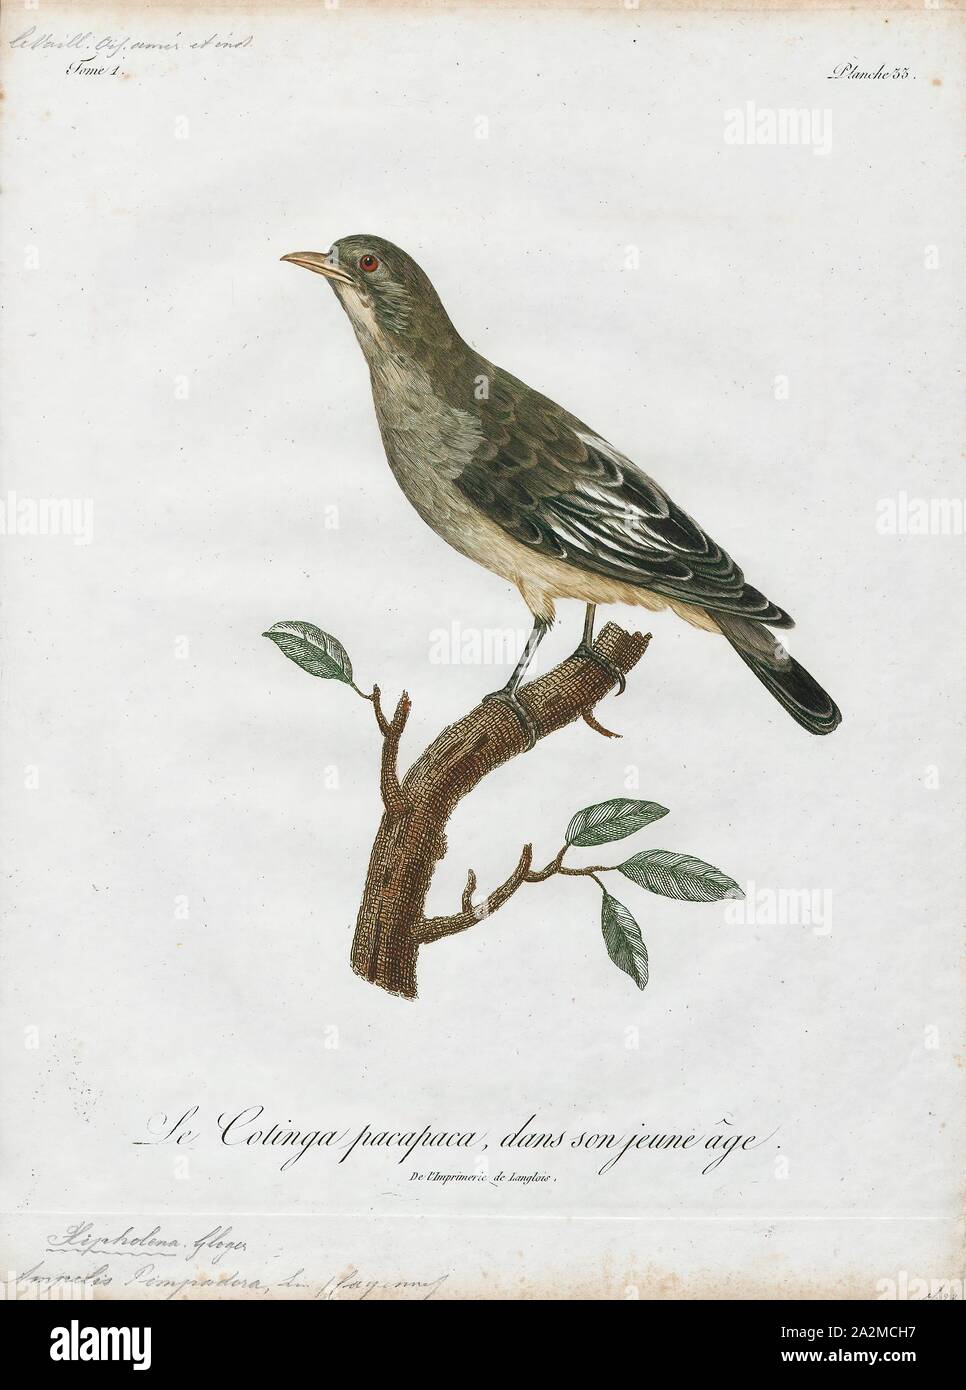 Cotinga pompadora, Print, The cotingas are a large family, Cotingidae, of suboscine passerine birds found in Central America and tropical South America. Cotingas are birds of forests or forest edges, that are primary frugivorous. They all have broad bills with hooked tips, rounded wings, and strong legs. They range in size from 12–13 cm (4.7–5.1 in) of the fiery-throated fruiteater (Pipreola chlorolepidota) up to 48–51 cm (19–20 in) of the Amazonian umbrellabird (Cephalopterus ornatus)., 1801 Stock Photo